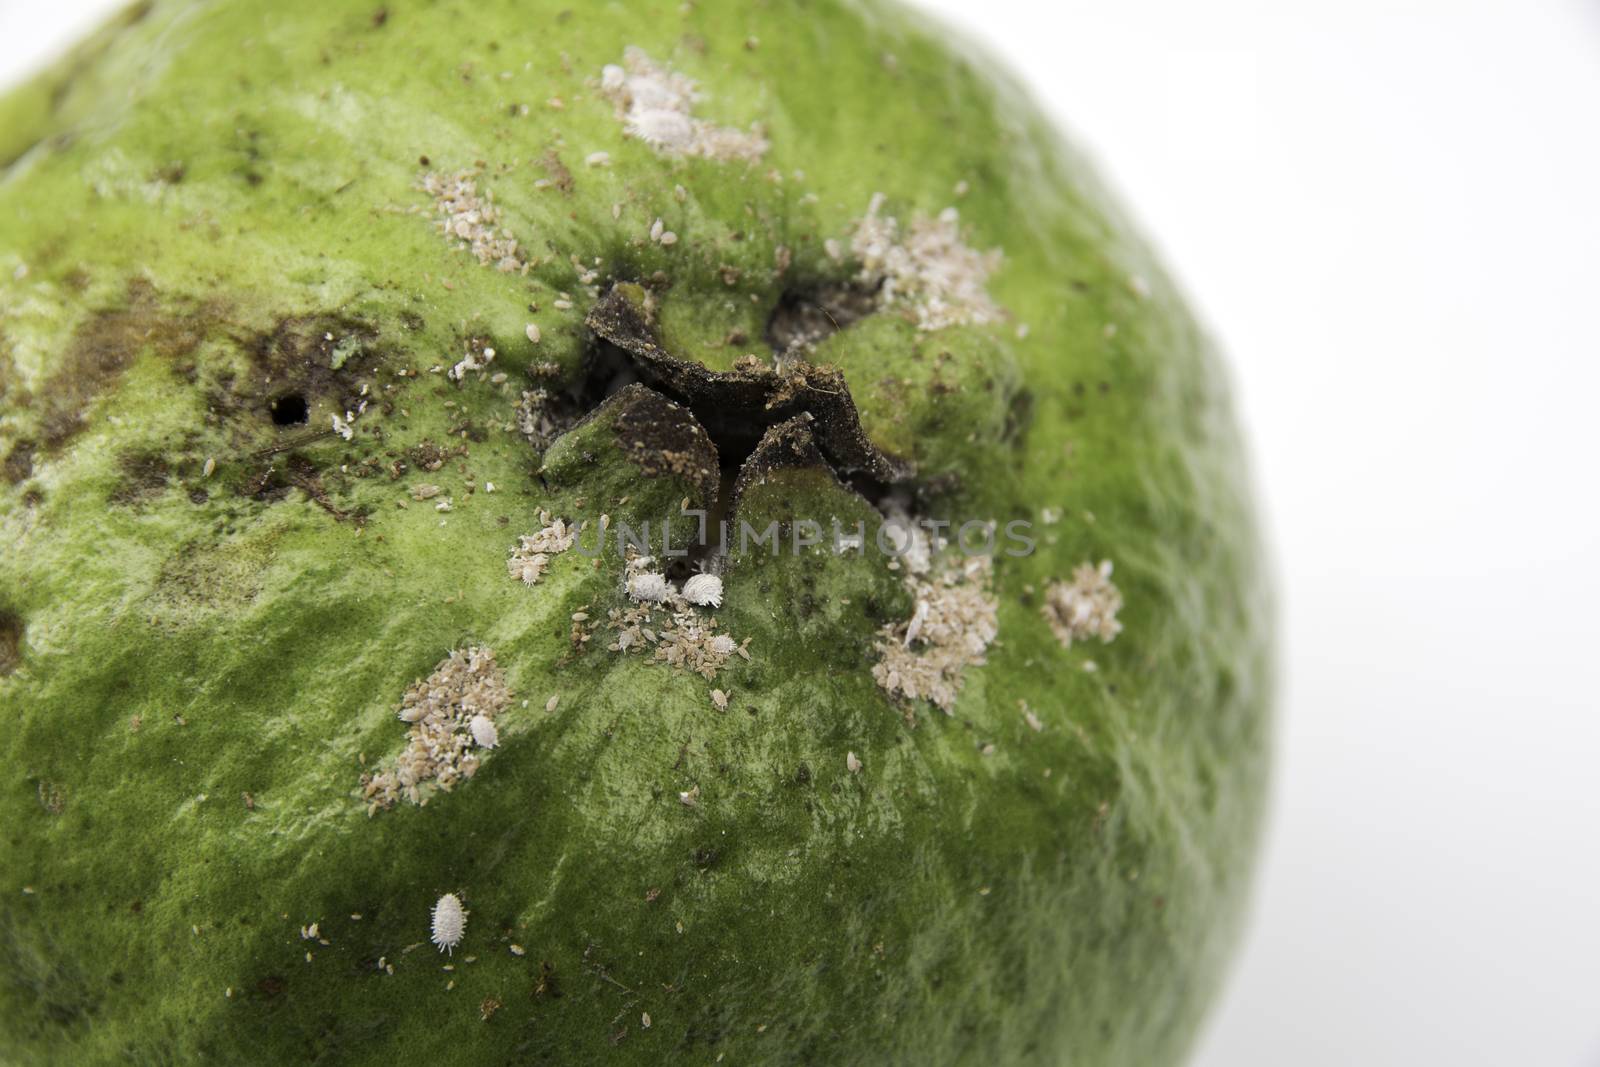 The rotten guava isolated on a white background. by kirisa99